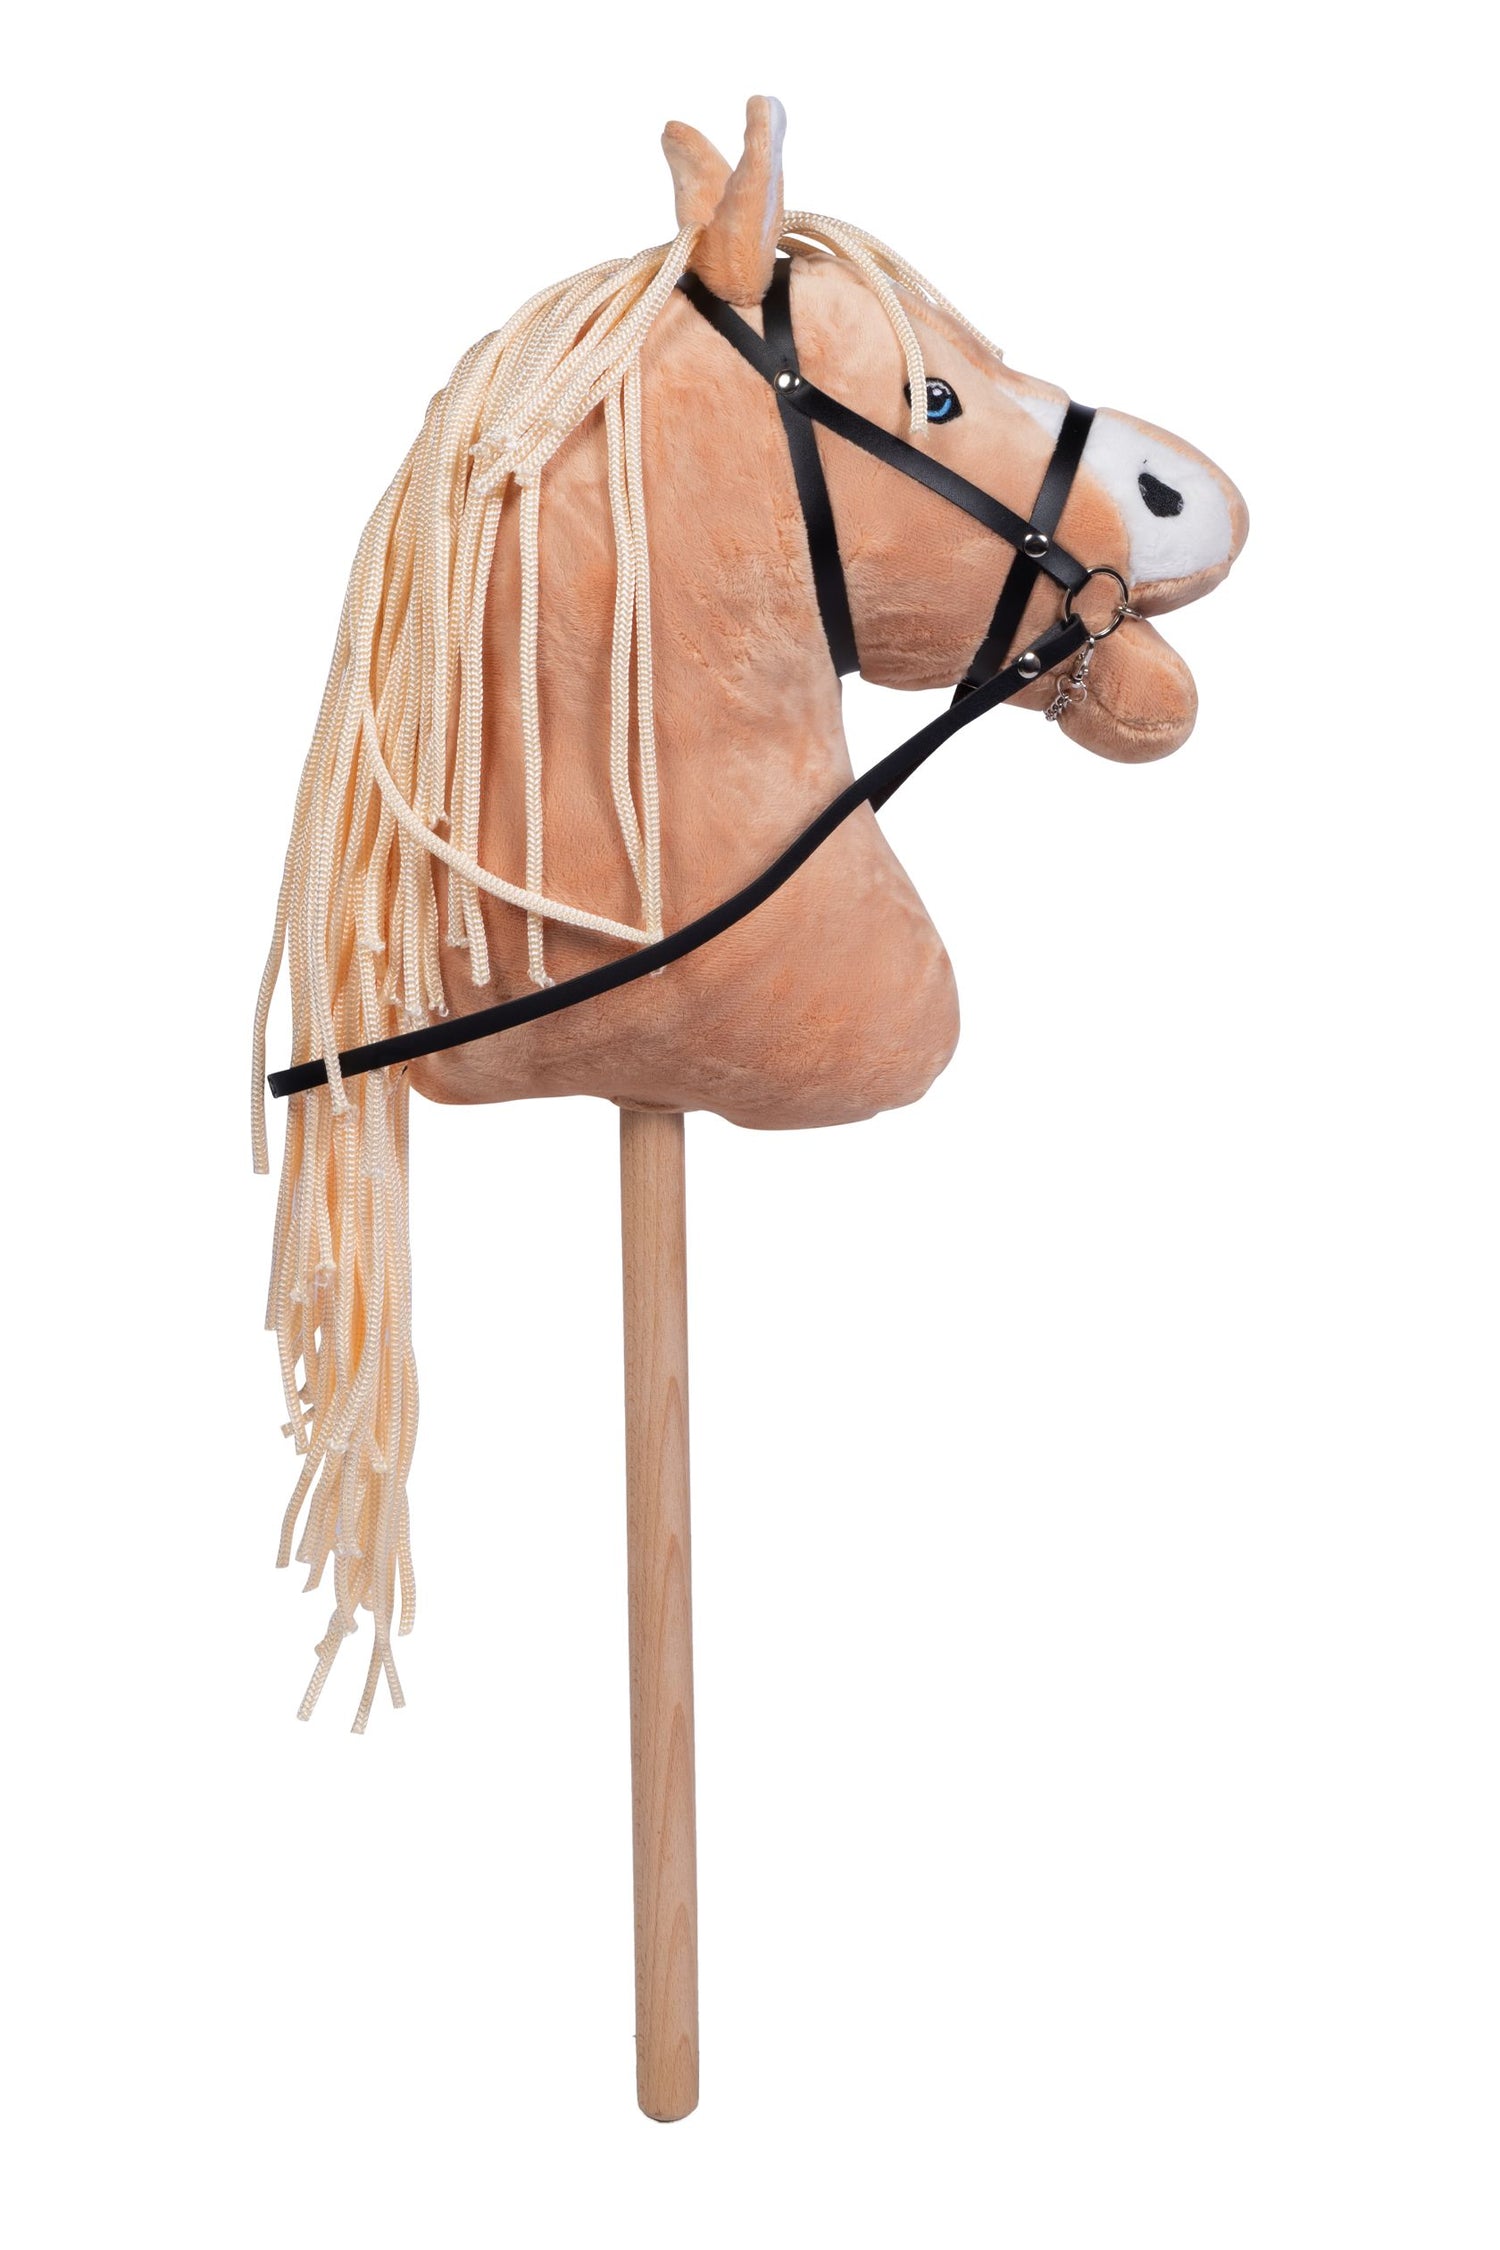 Hobby Horse Photos and Images